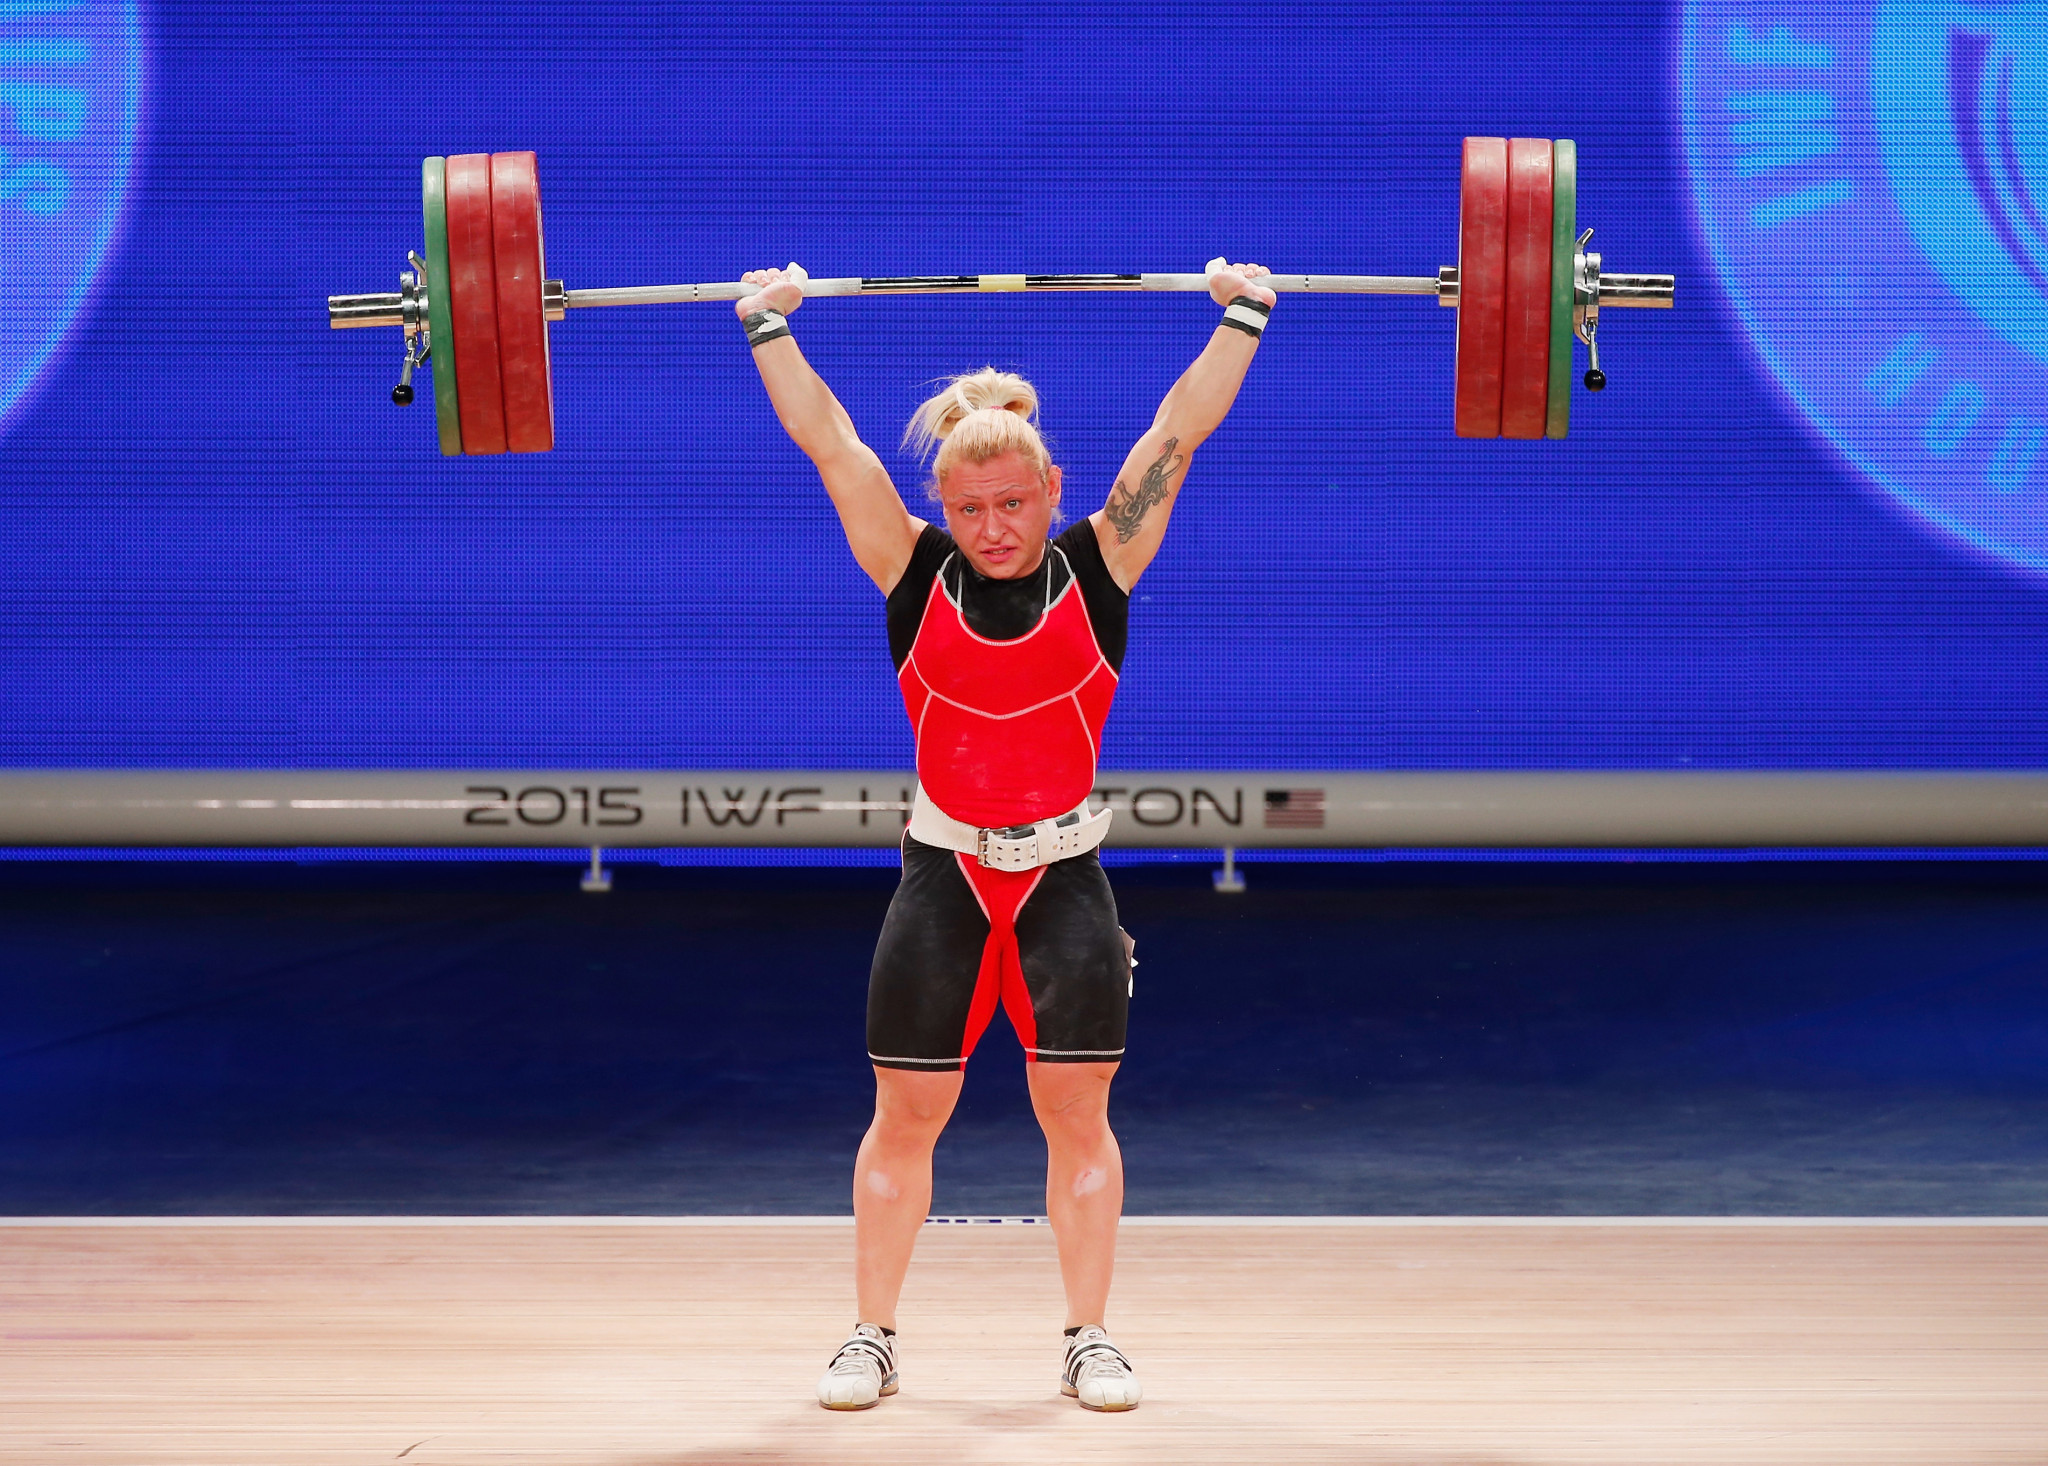 Kostova wins closely fought womens 59kg at European Weightlifting Championships